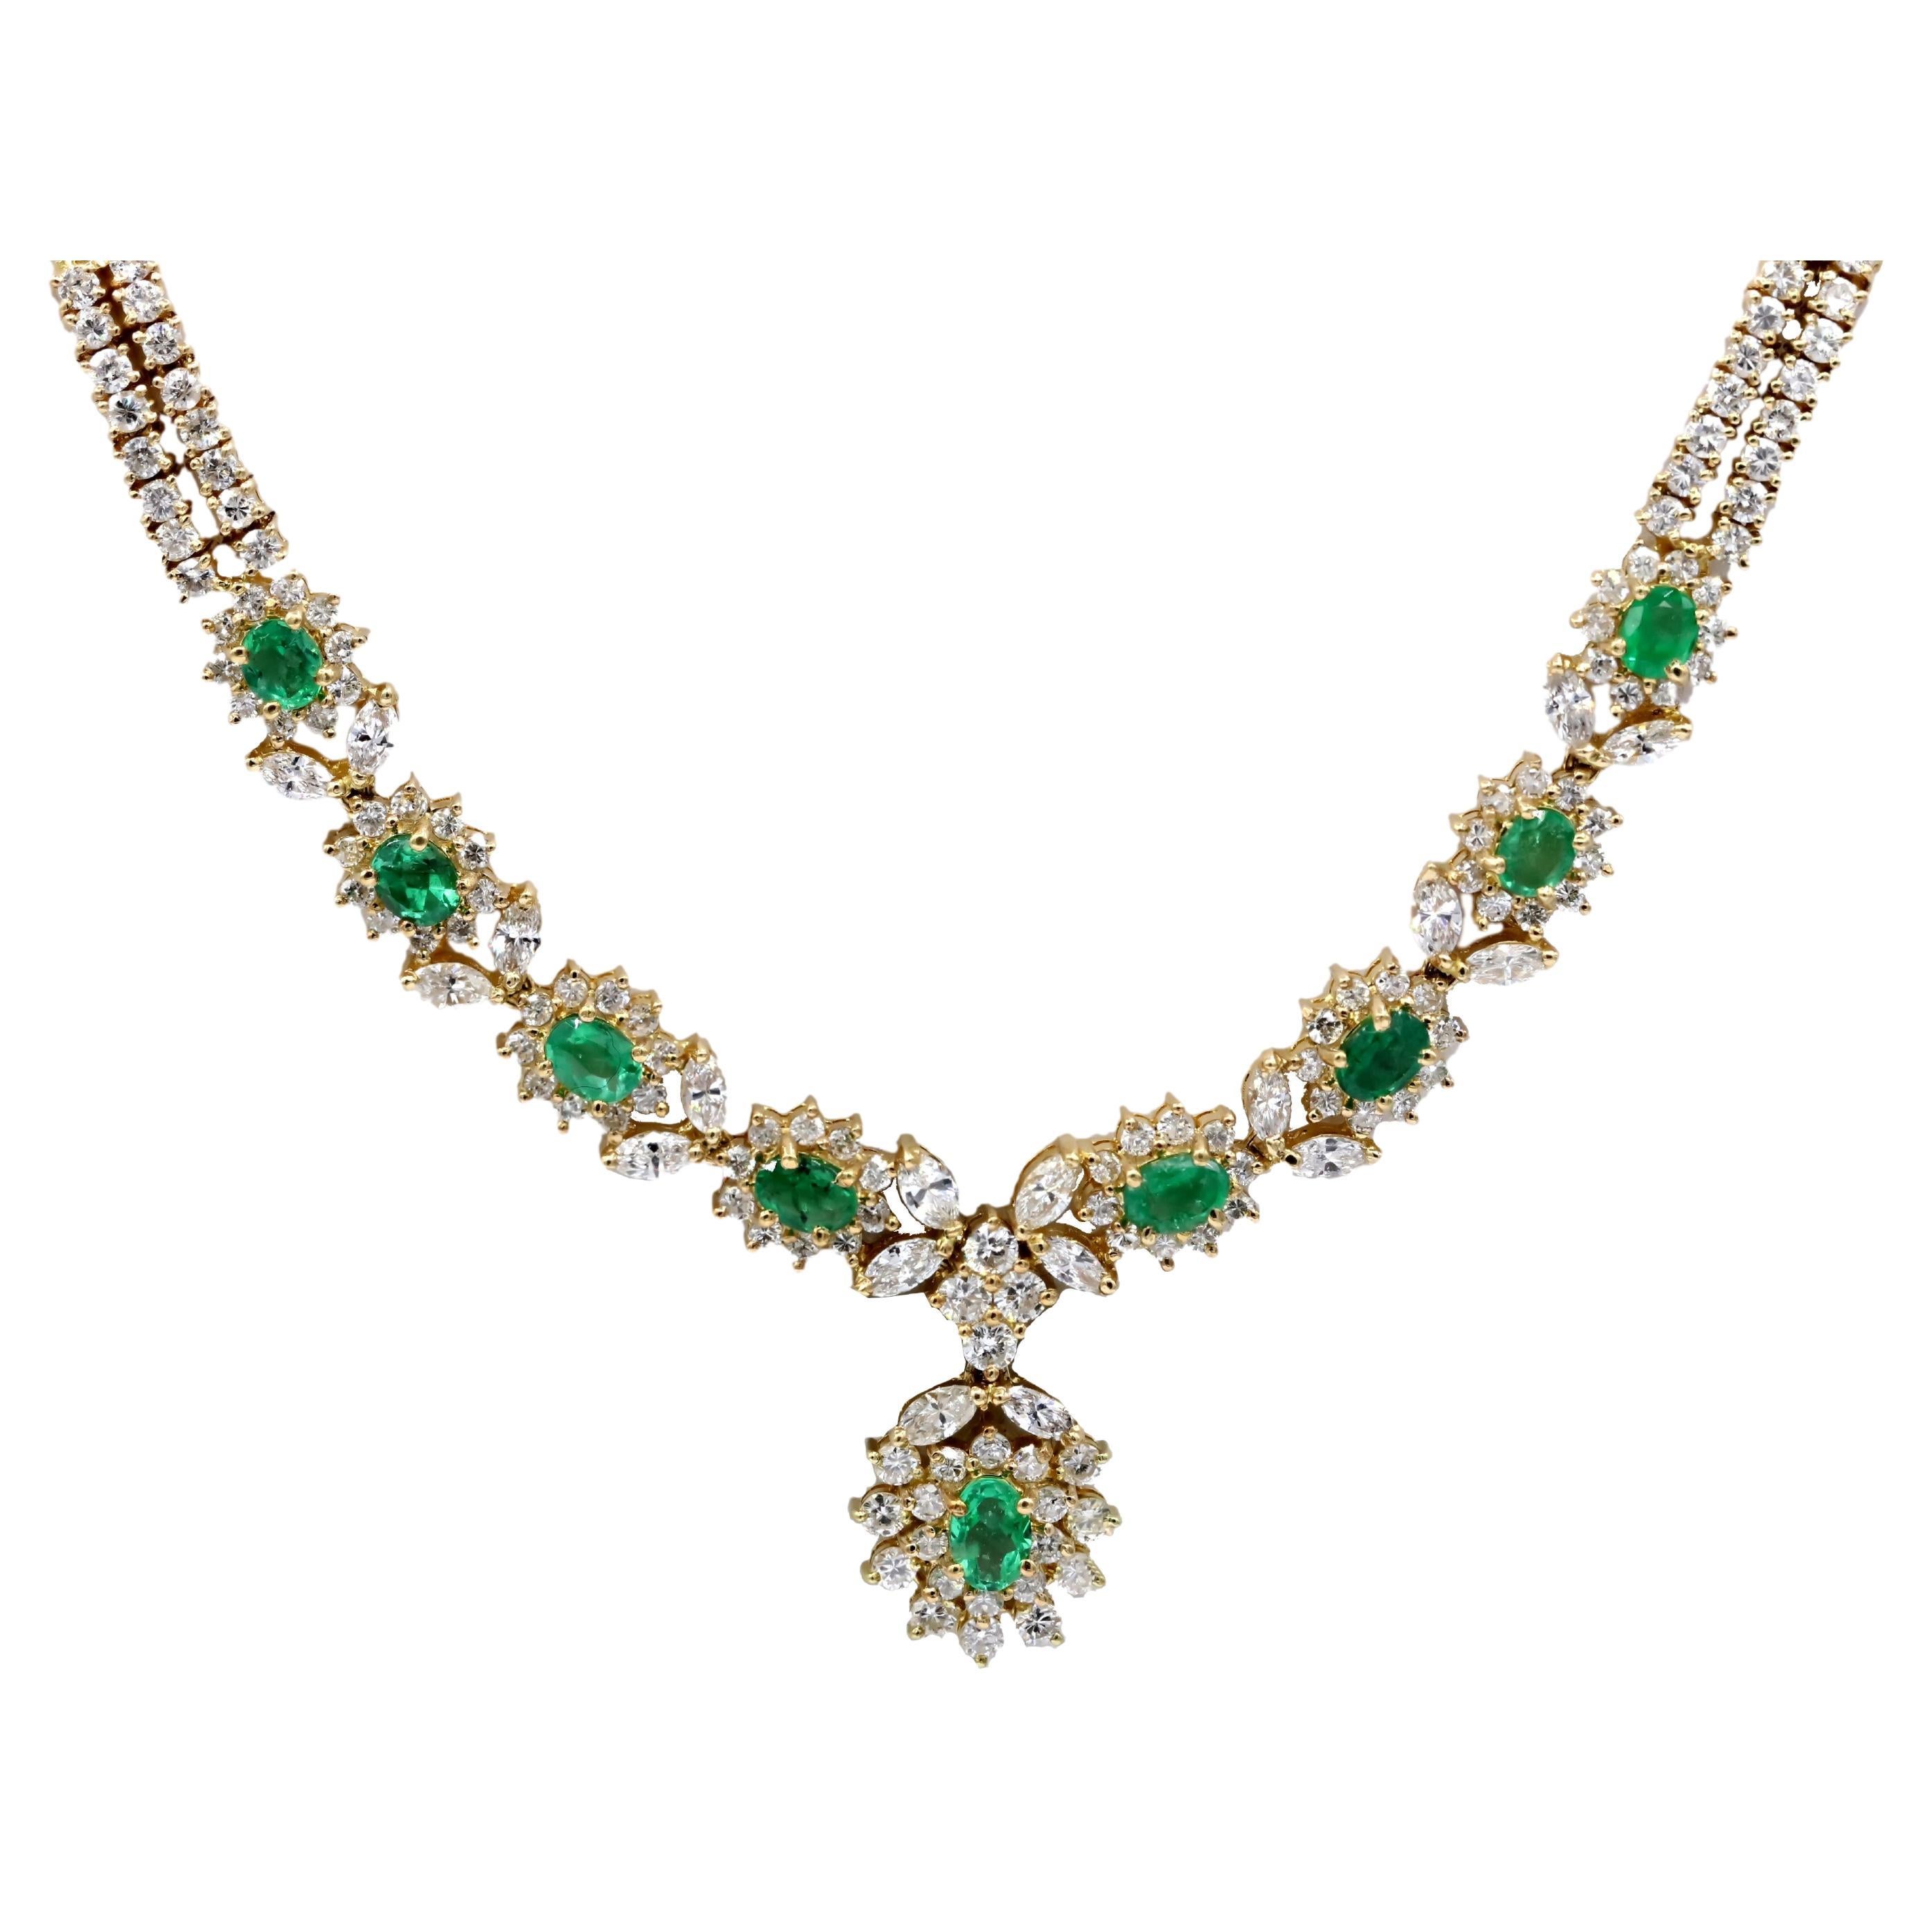 Diana M. 3.60 Carat Emerald and Diamond Necklace in Yellow Gold